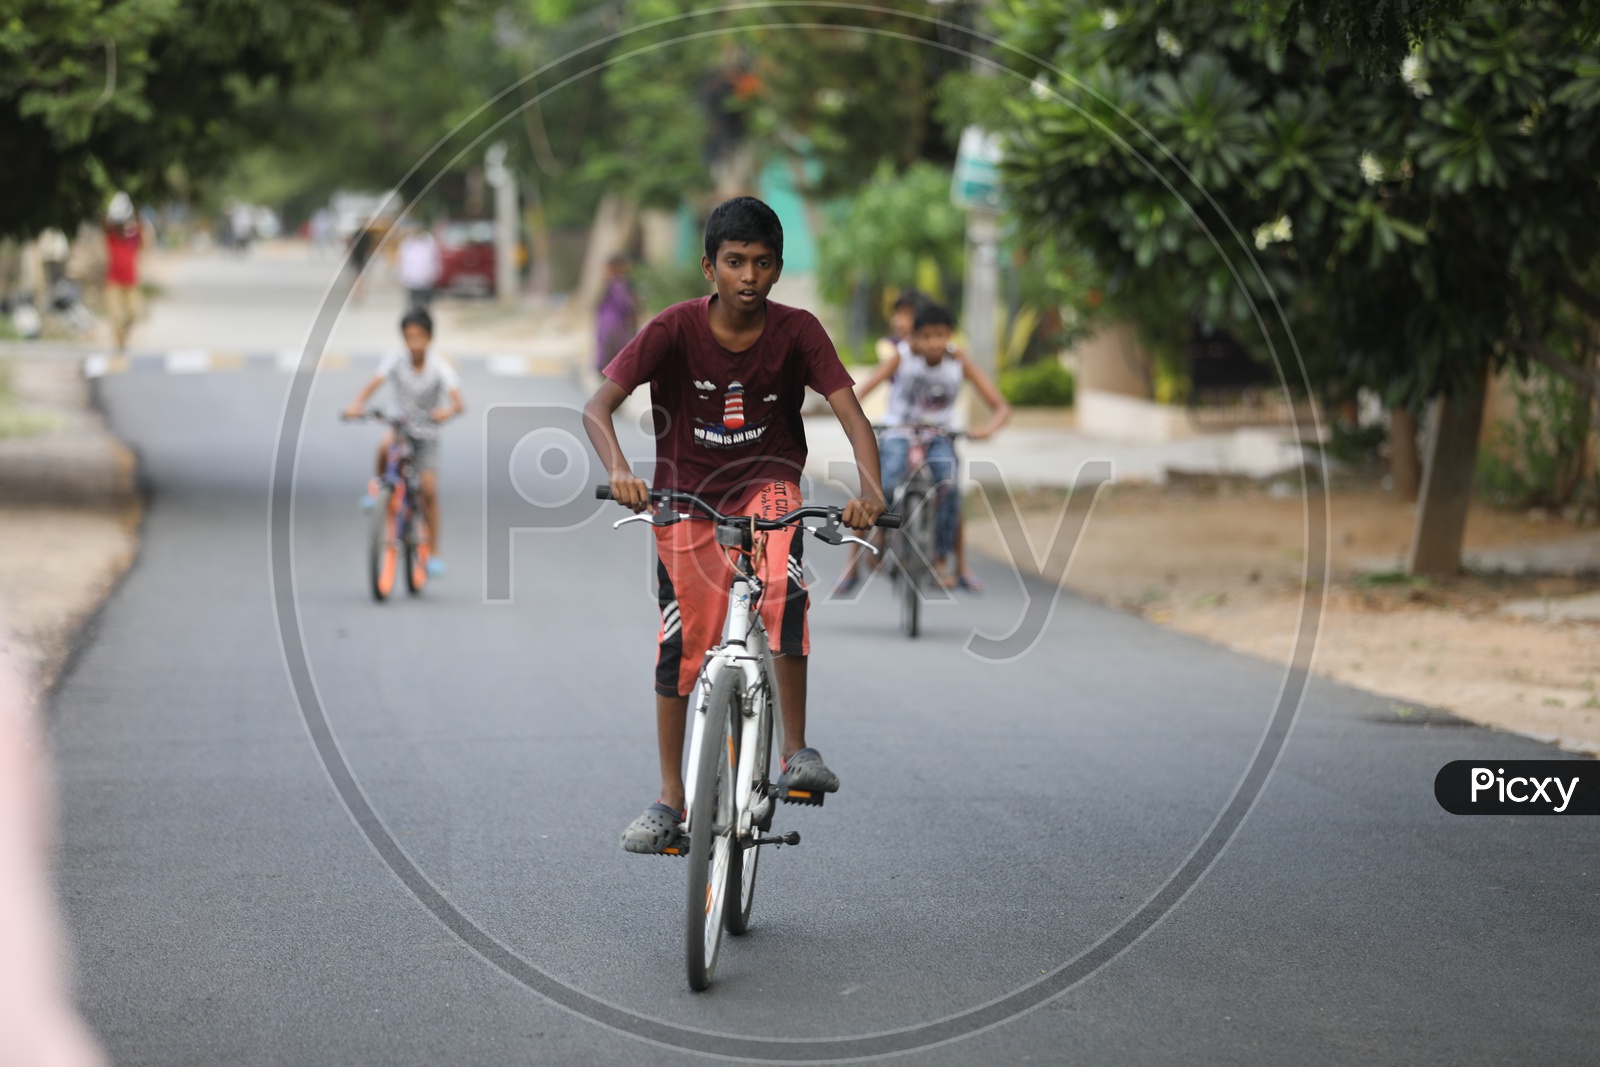 Indian Rural Village Kids Or Children Riding Bicycles Or Cycles on The Roads